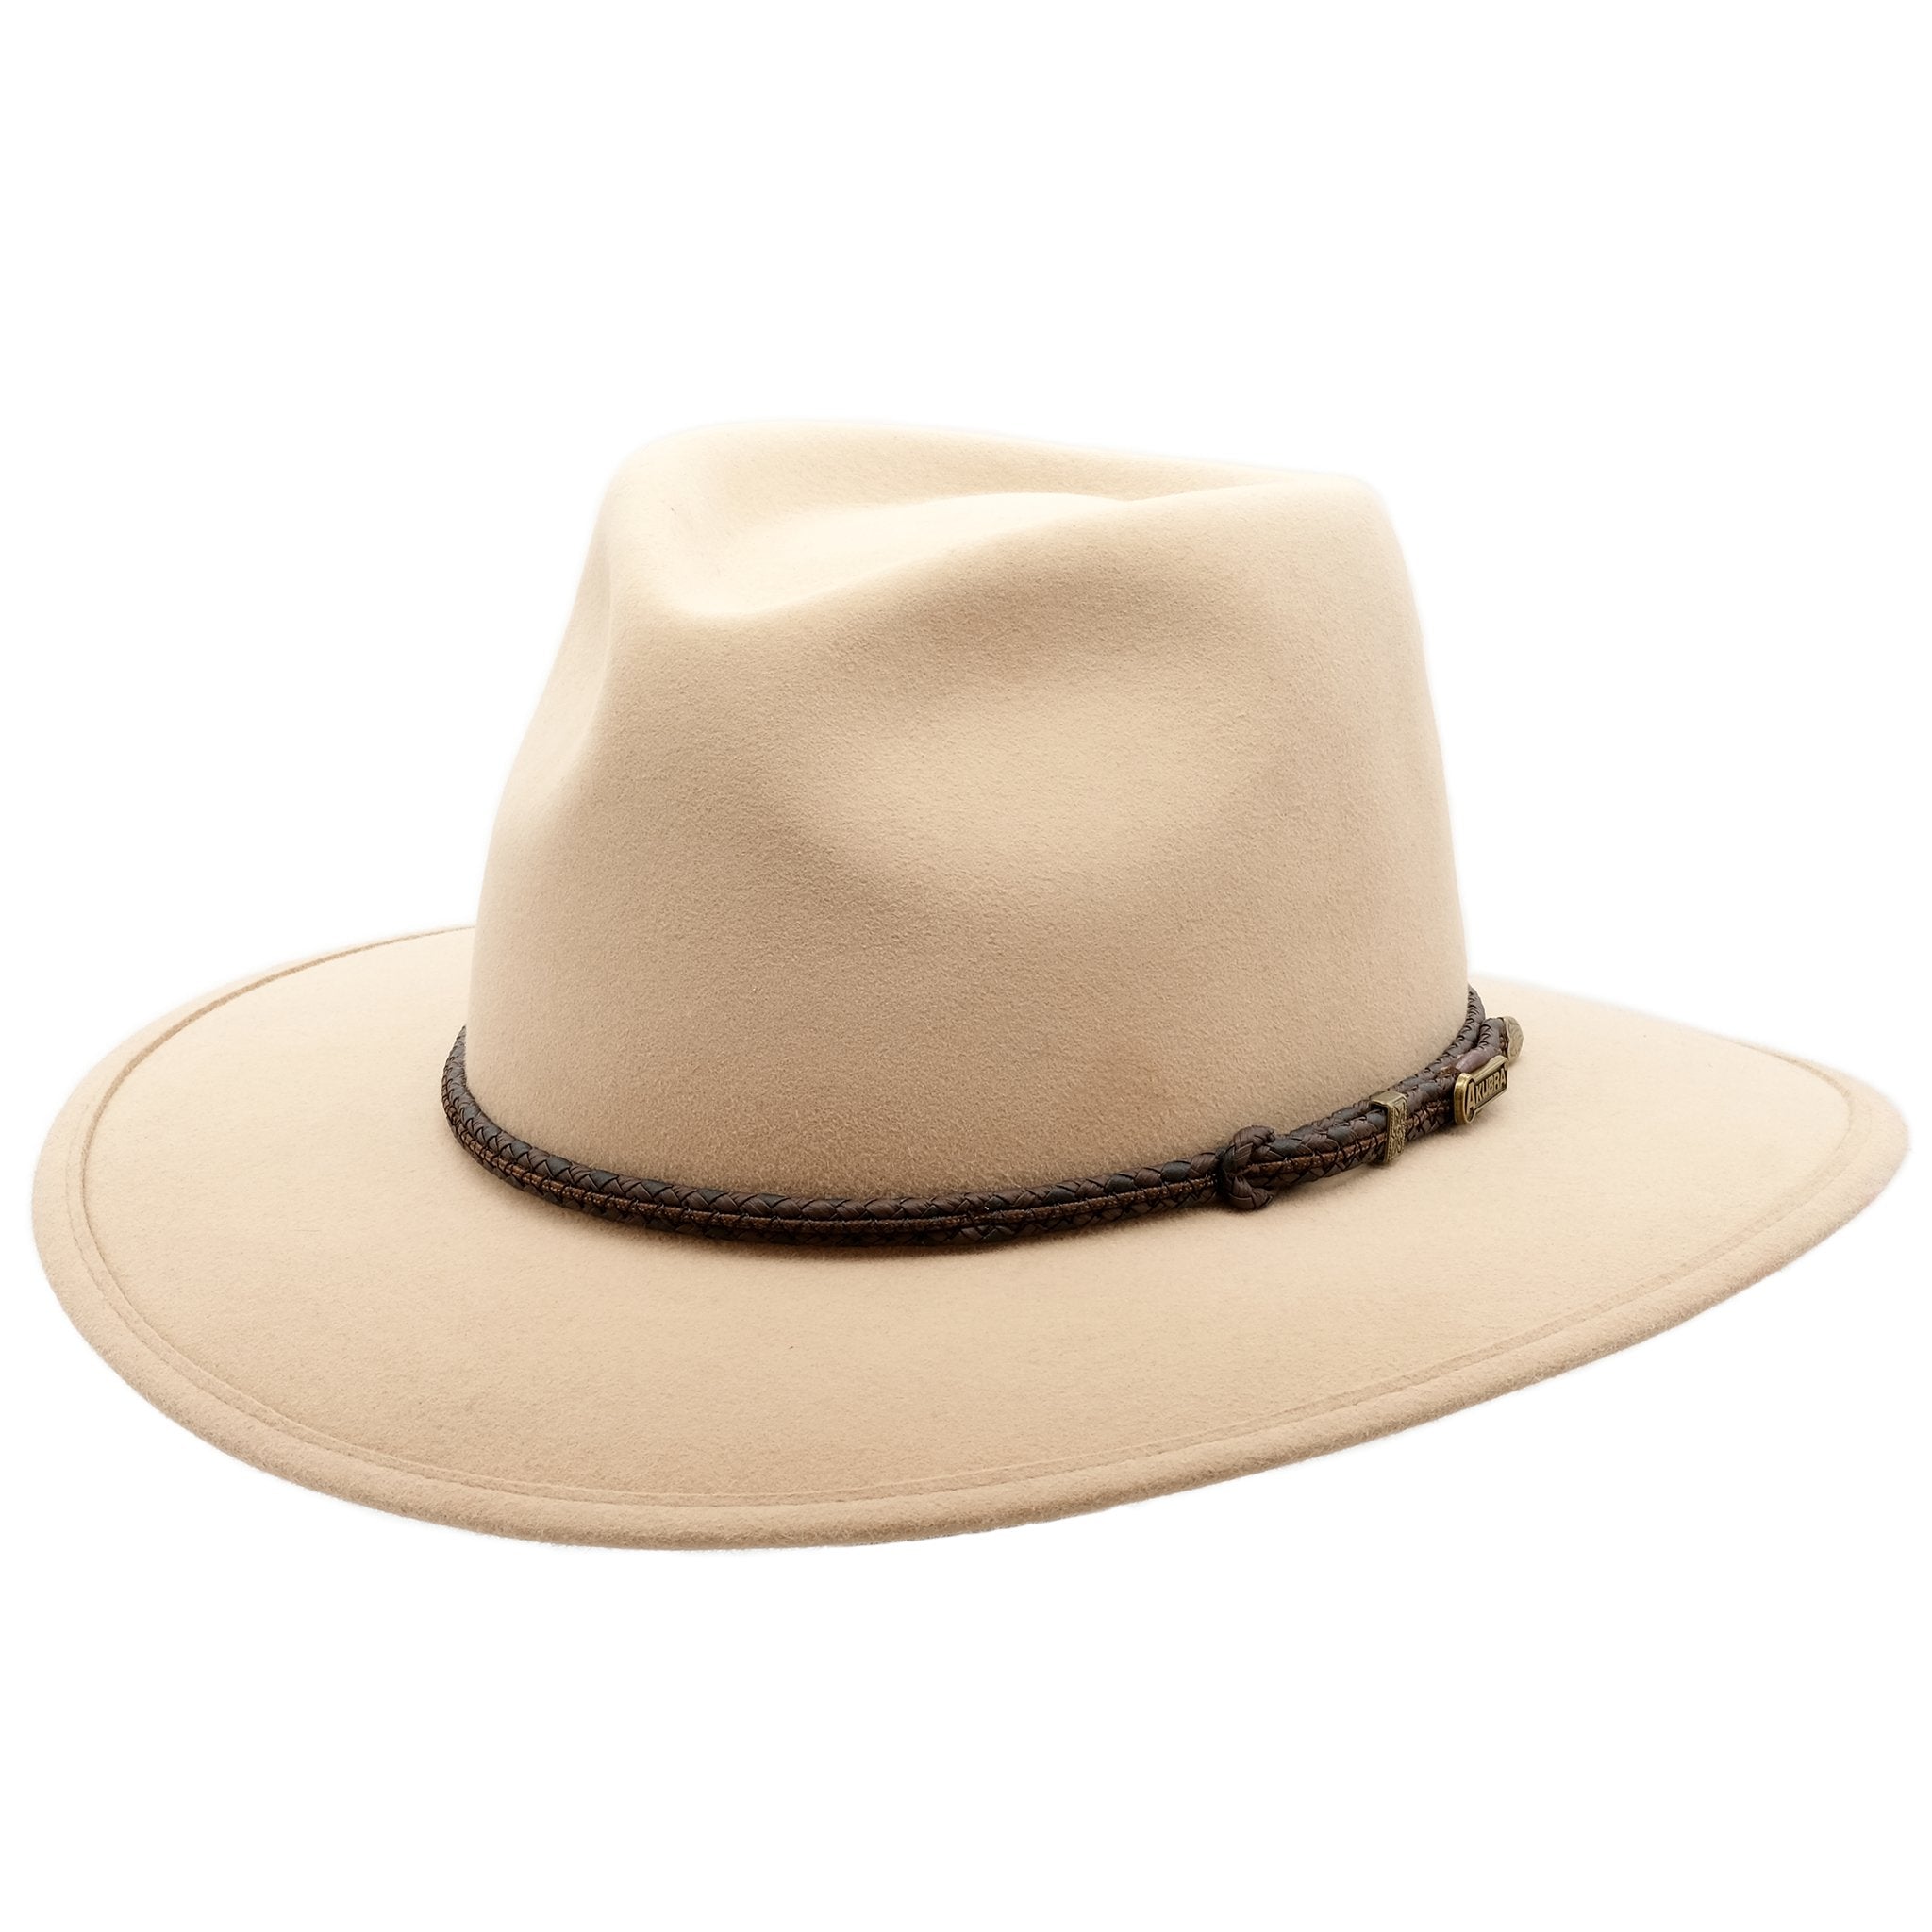 Angle view of sand coloured Akubra traveller style hat